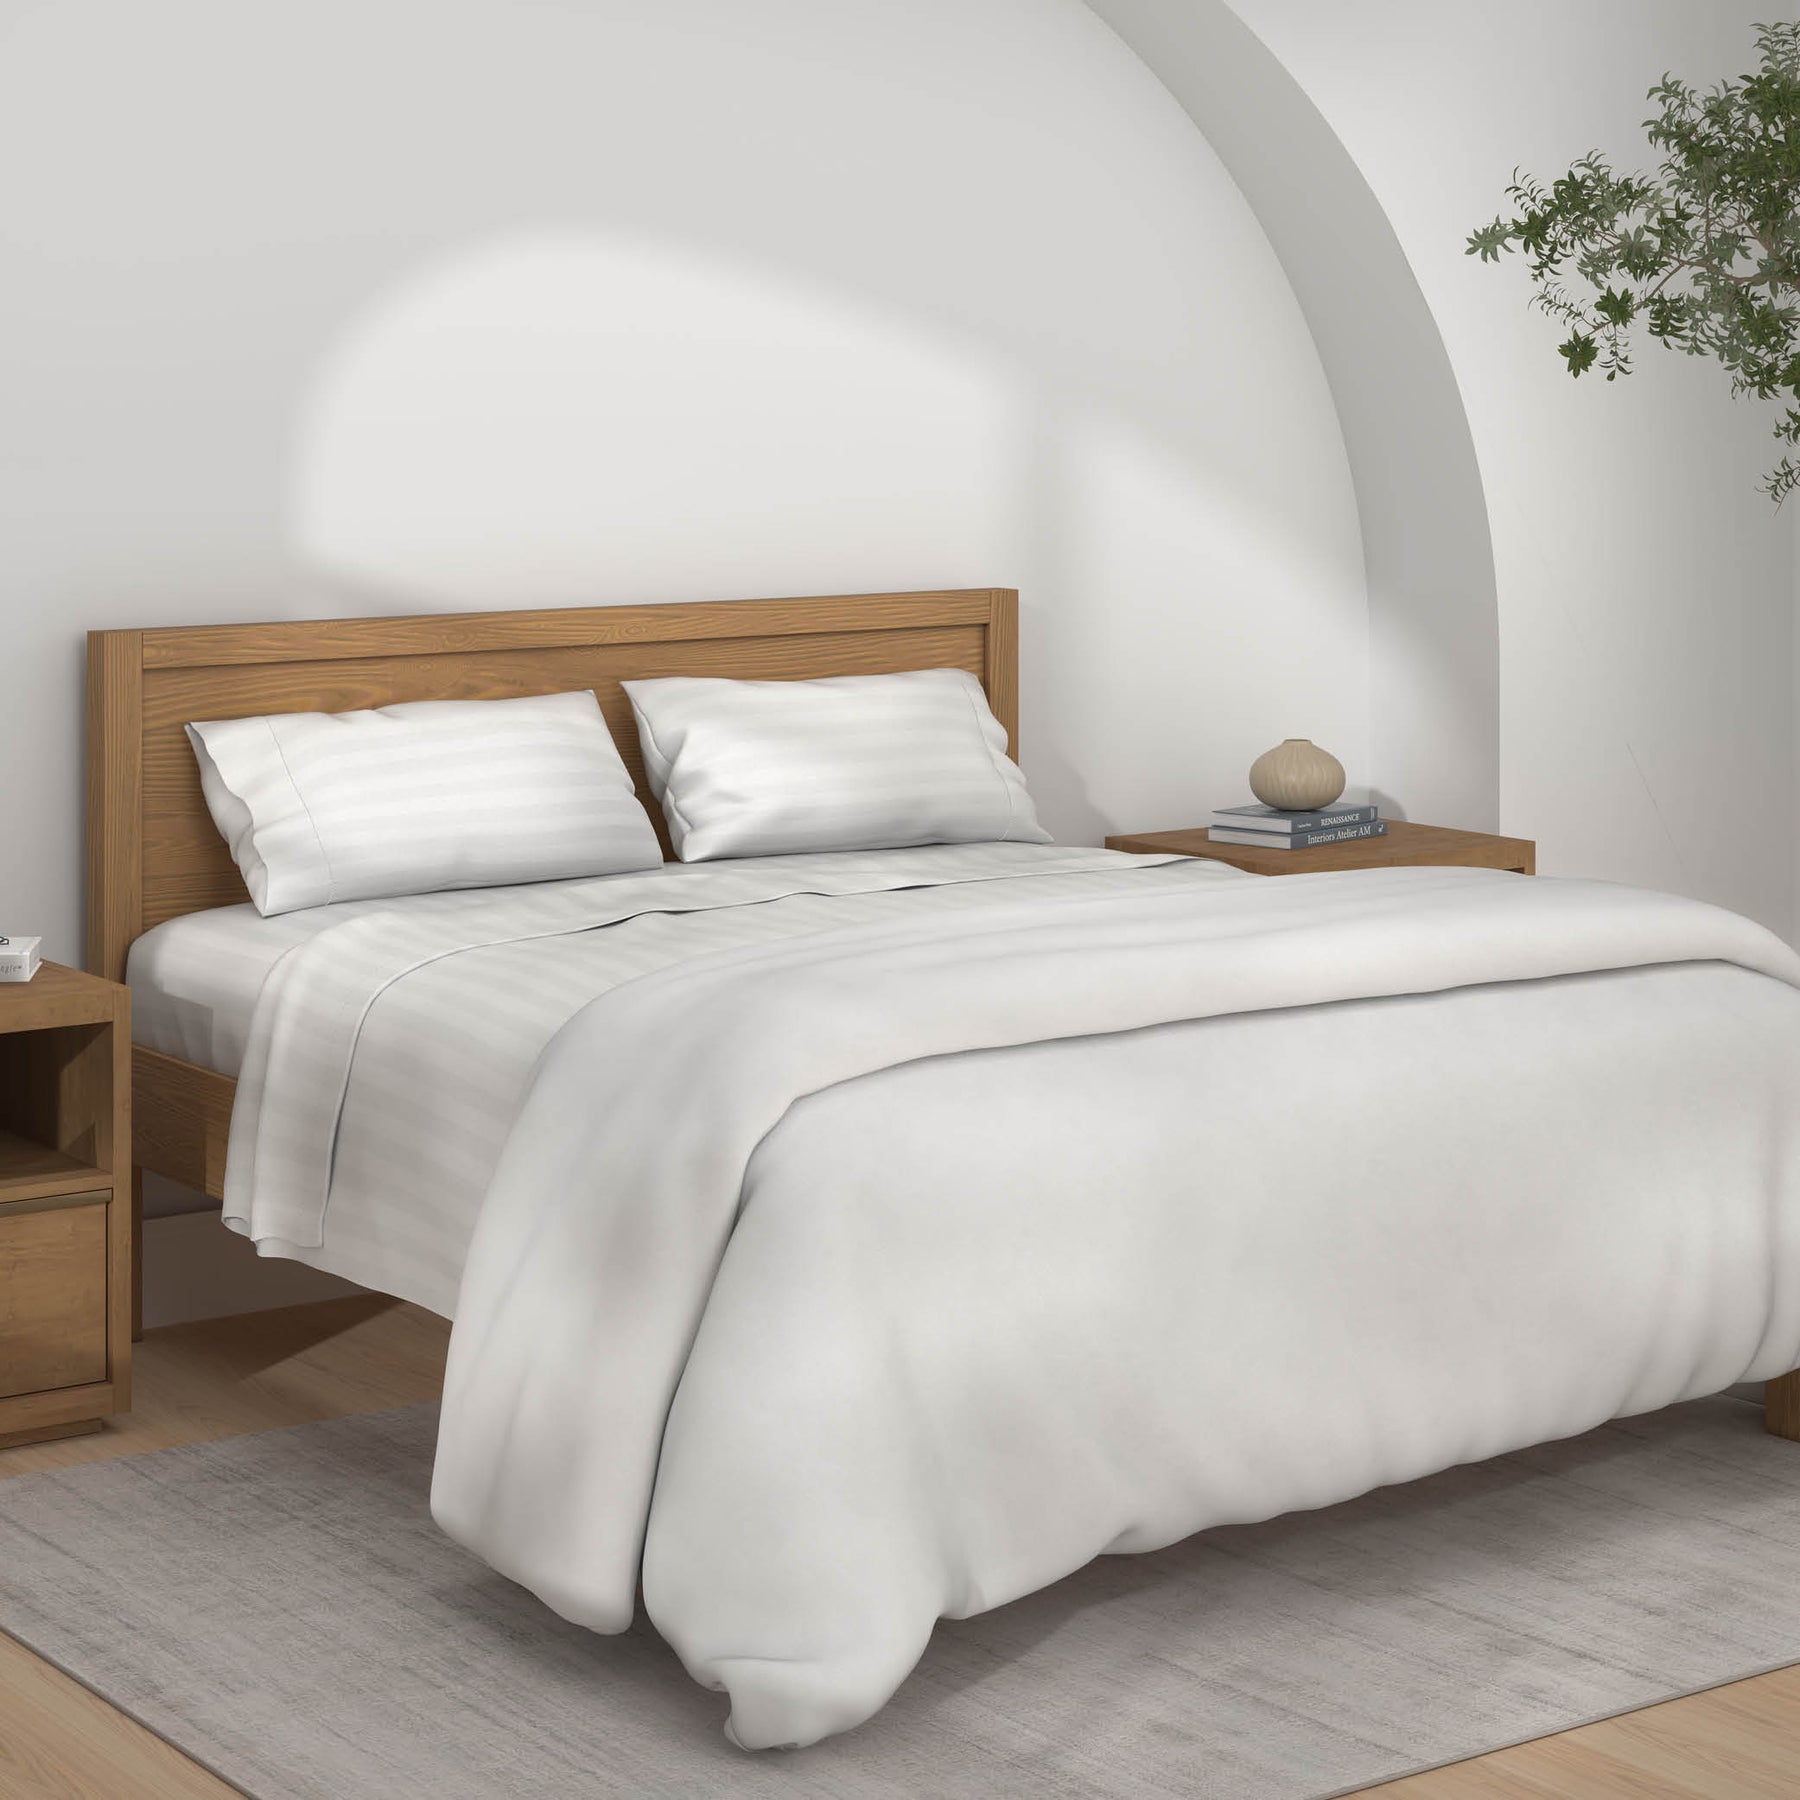 Image of a neatly made bed with the white Luxury Resort Hotel Collection sheets on the bed